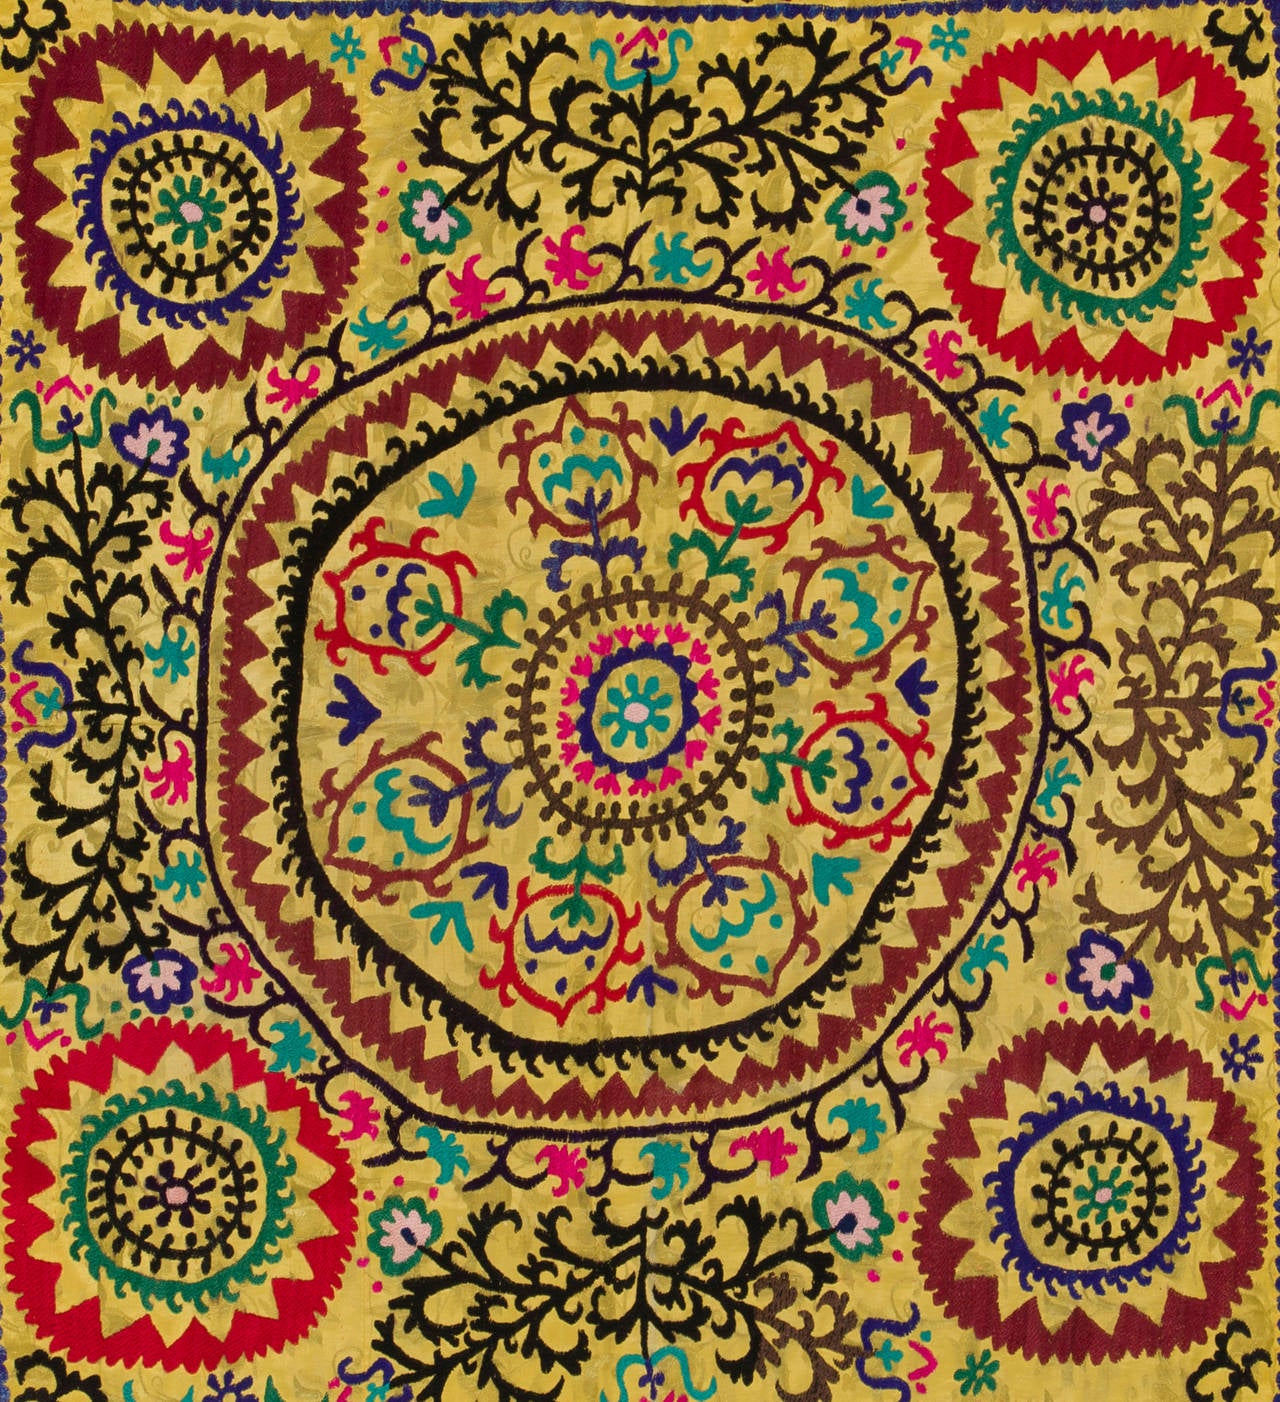 A vintage handmade needlework from Uzbekistan in Central Asia. This fine embroidery can be used as a wall-hanging, a bed or table cover or as sofa throw.